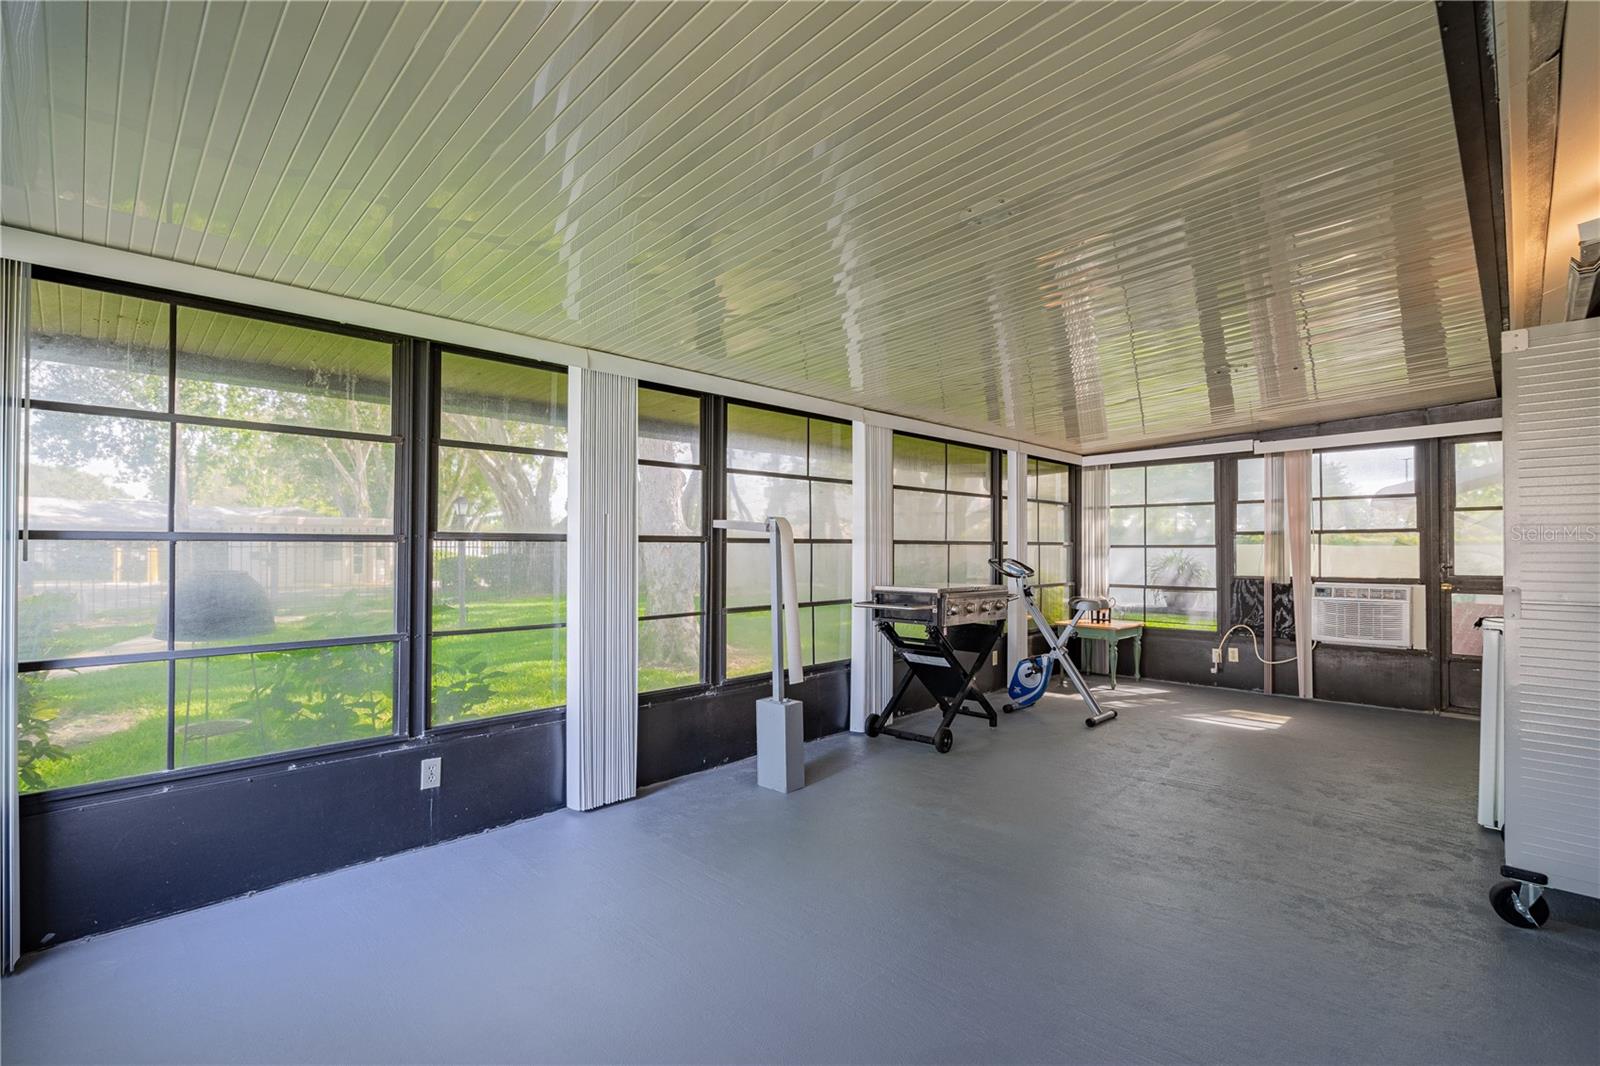 Huge Lanai that can add to your Living Square footage with the aid of the attached Industrial size AC!